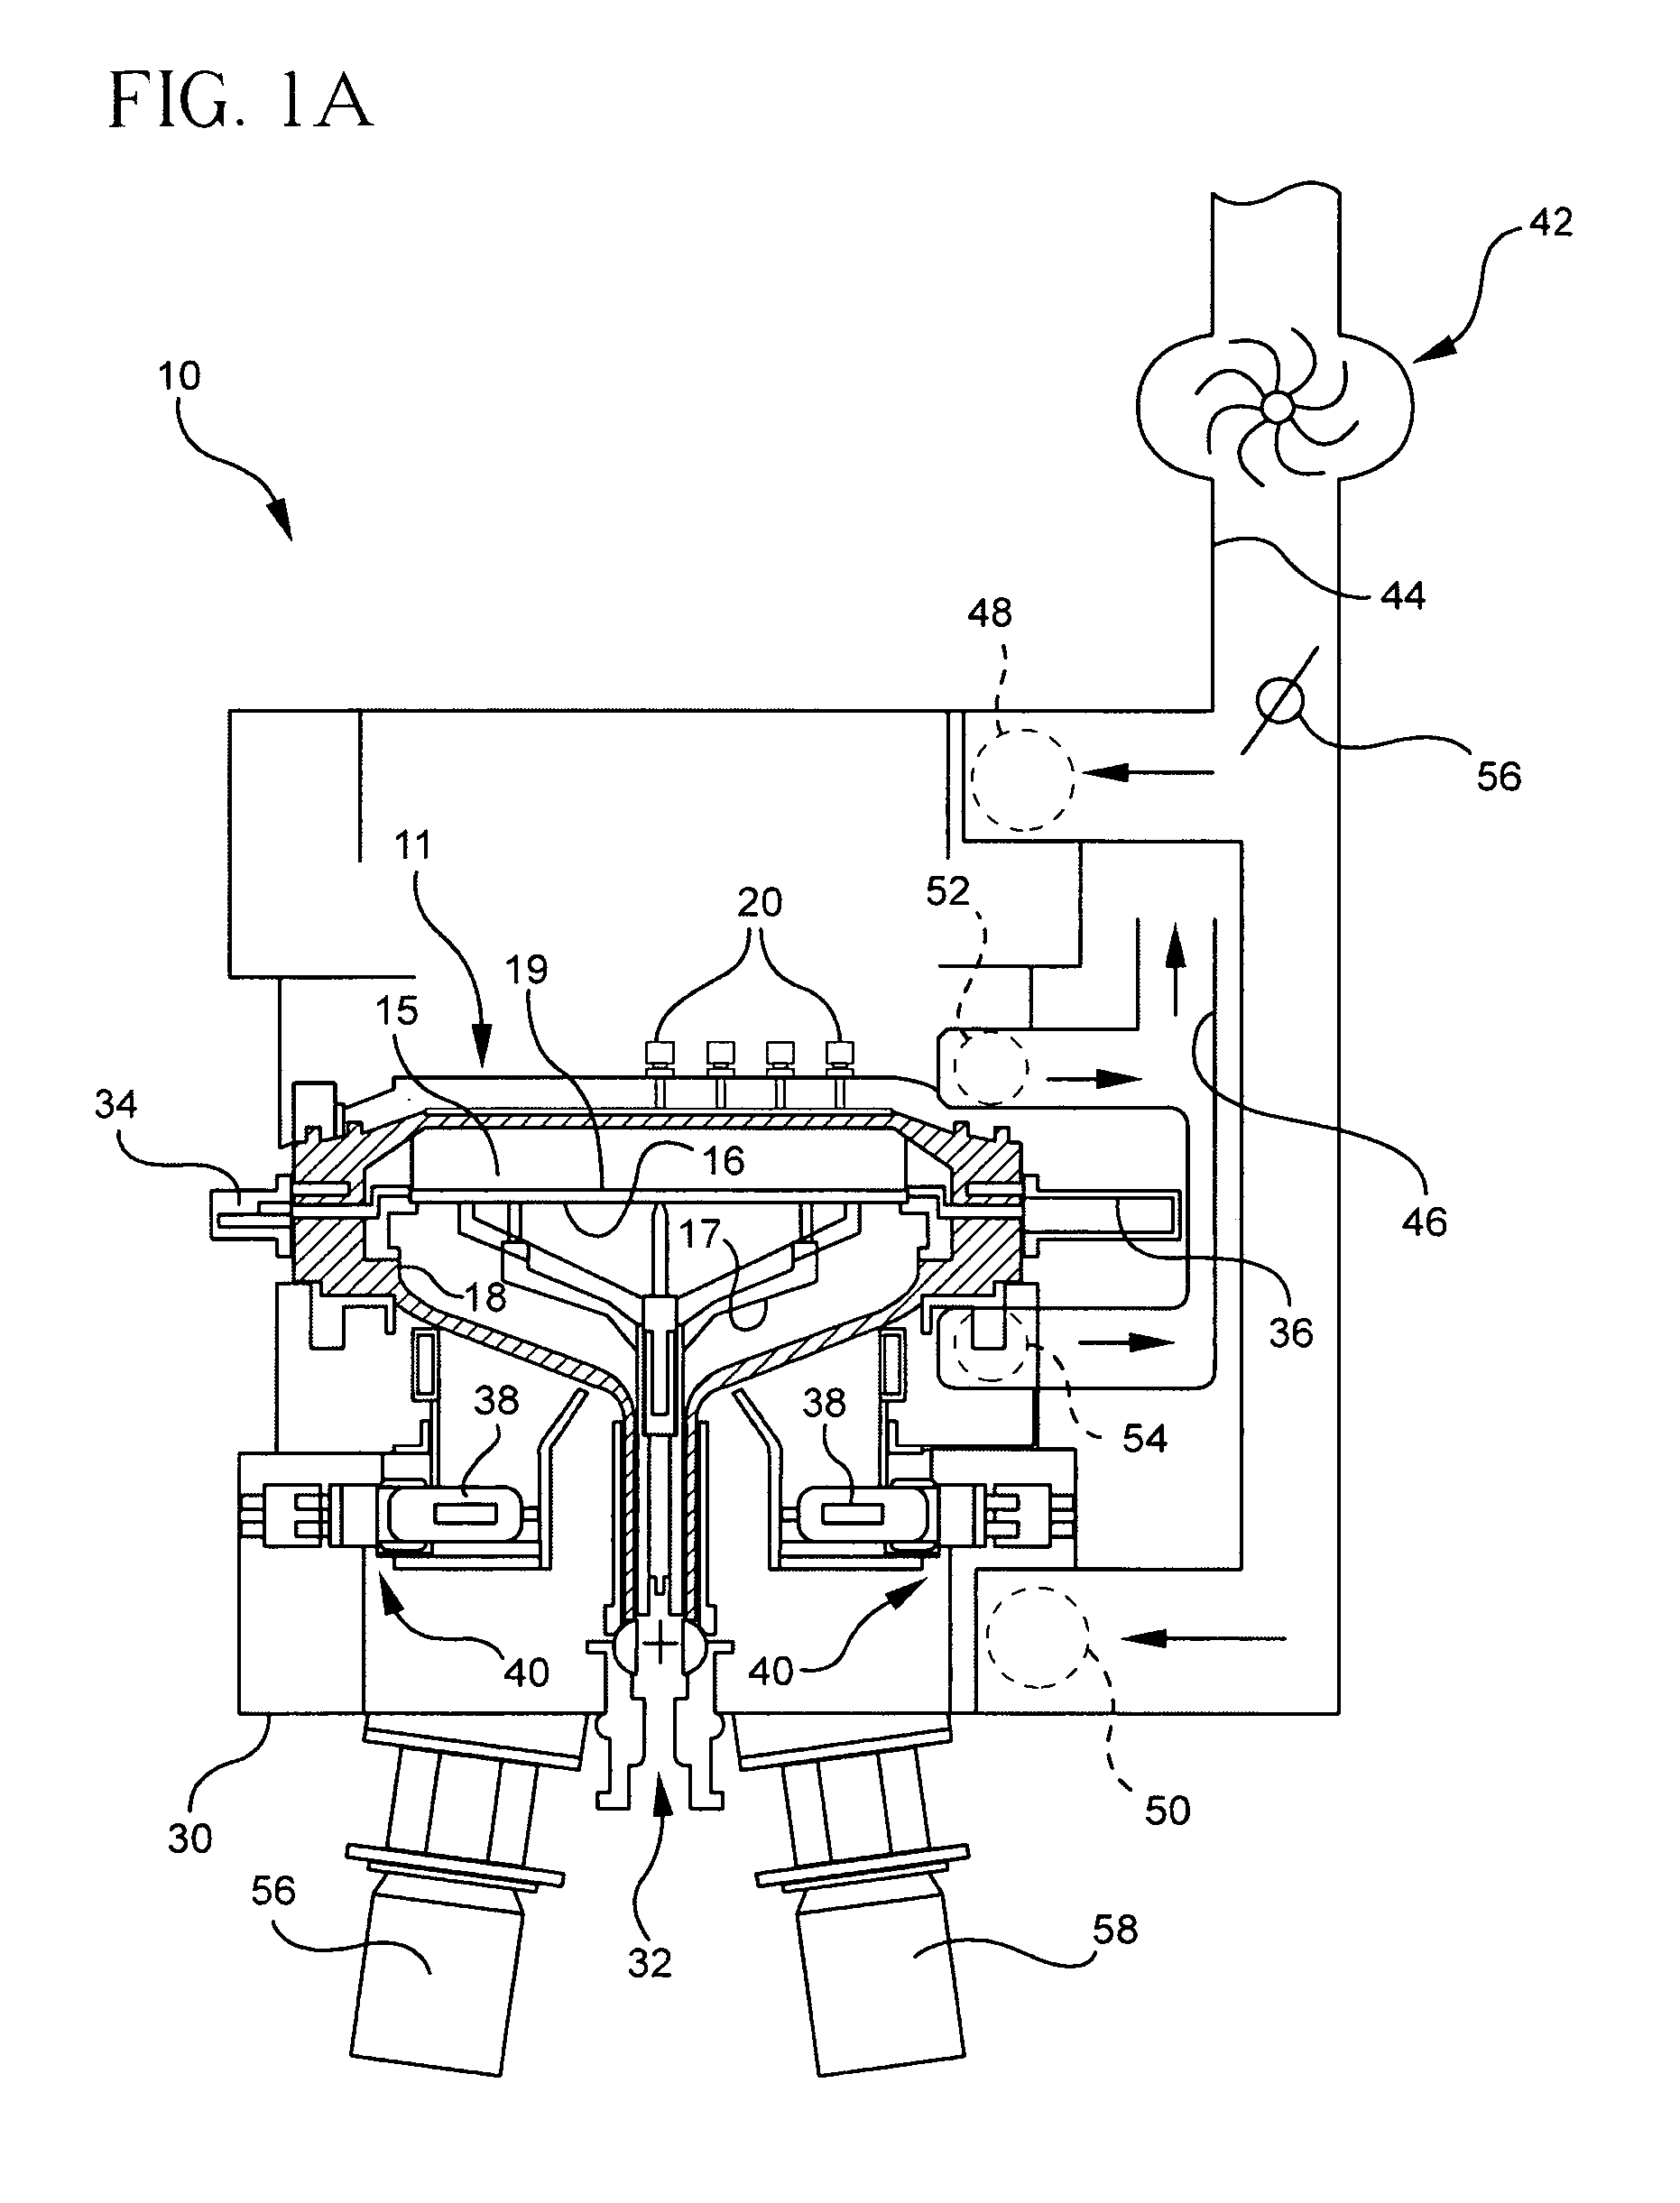 Film formation apparatus and methods including temperature and emissivity/pattern compensation